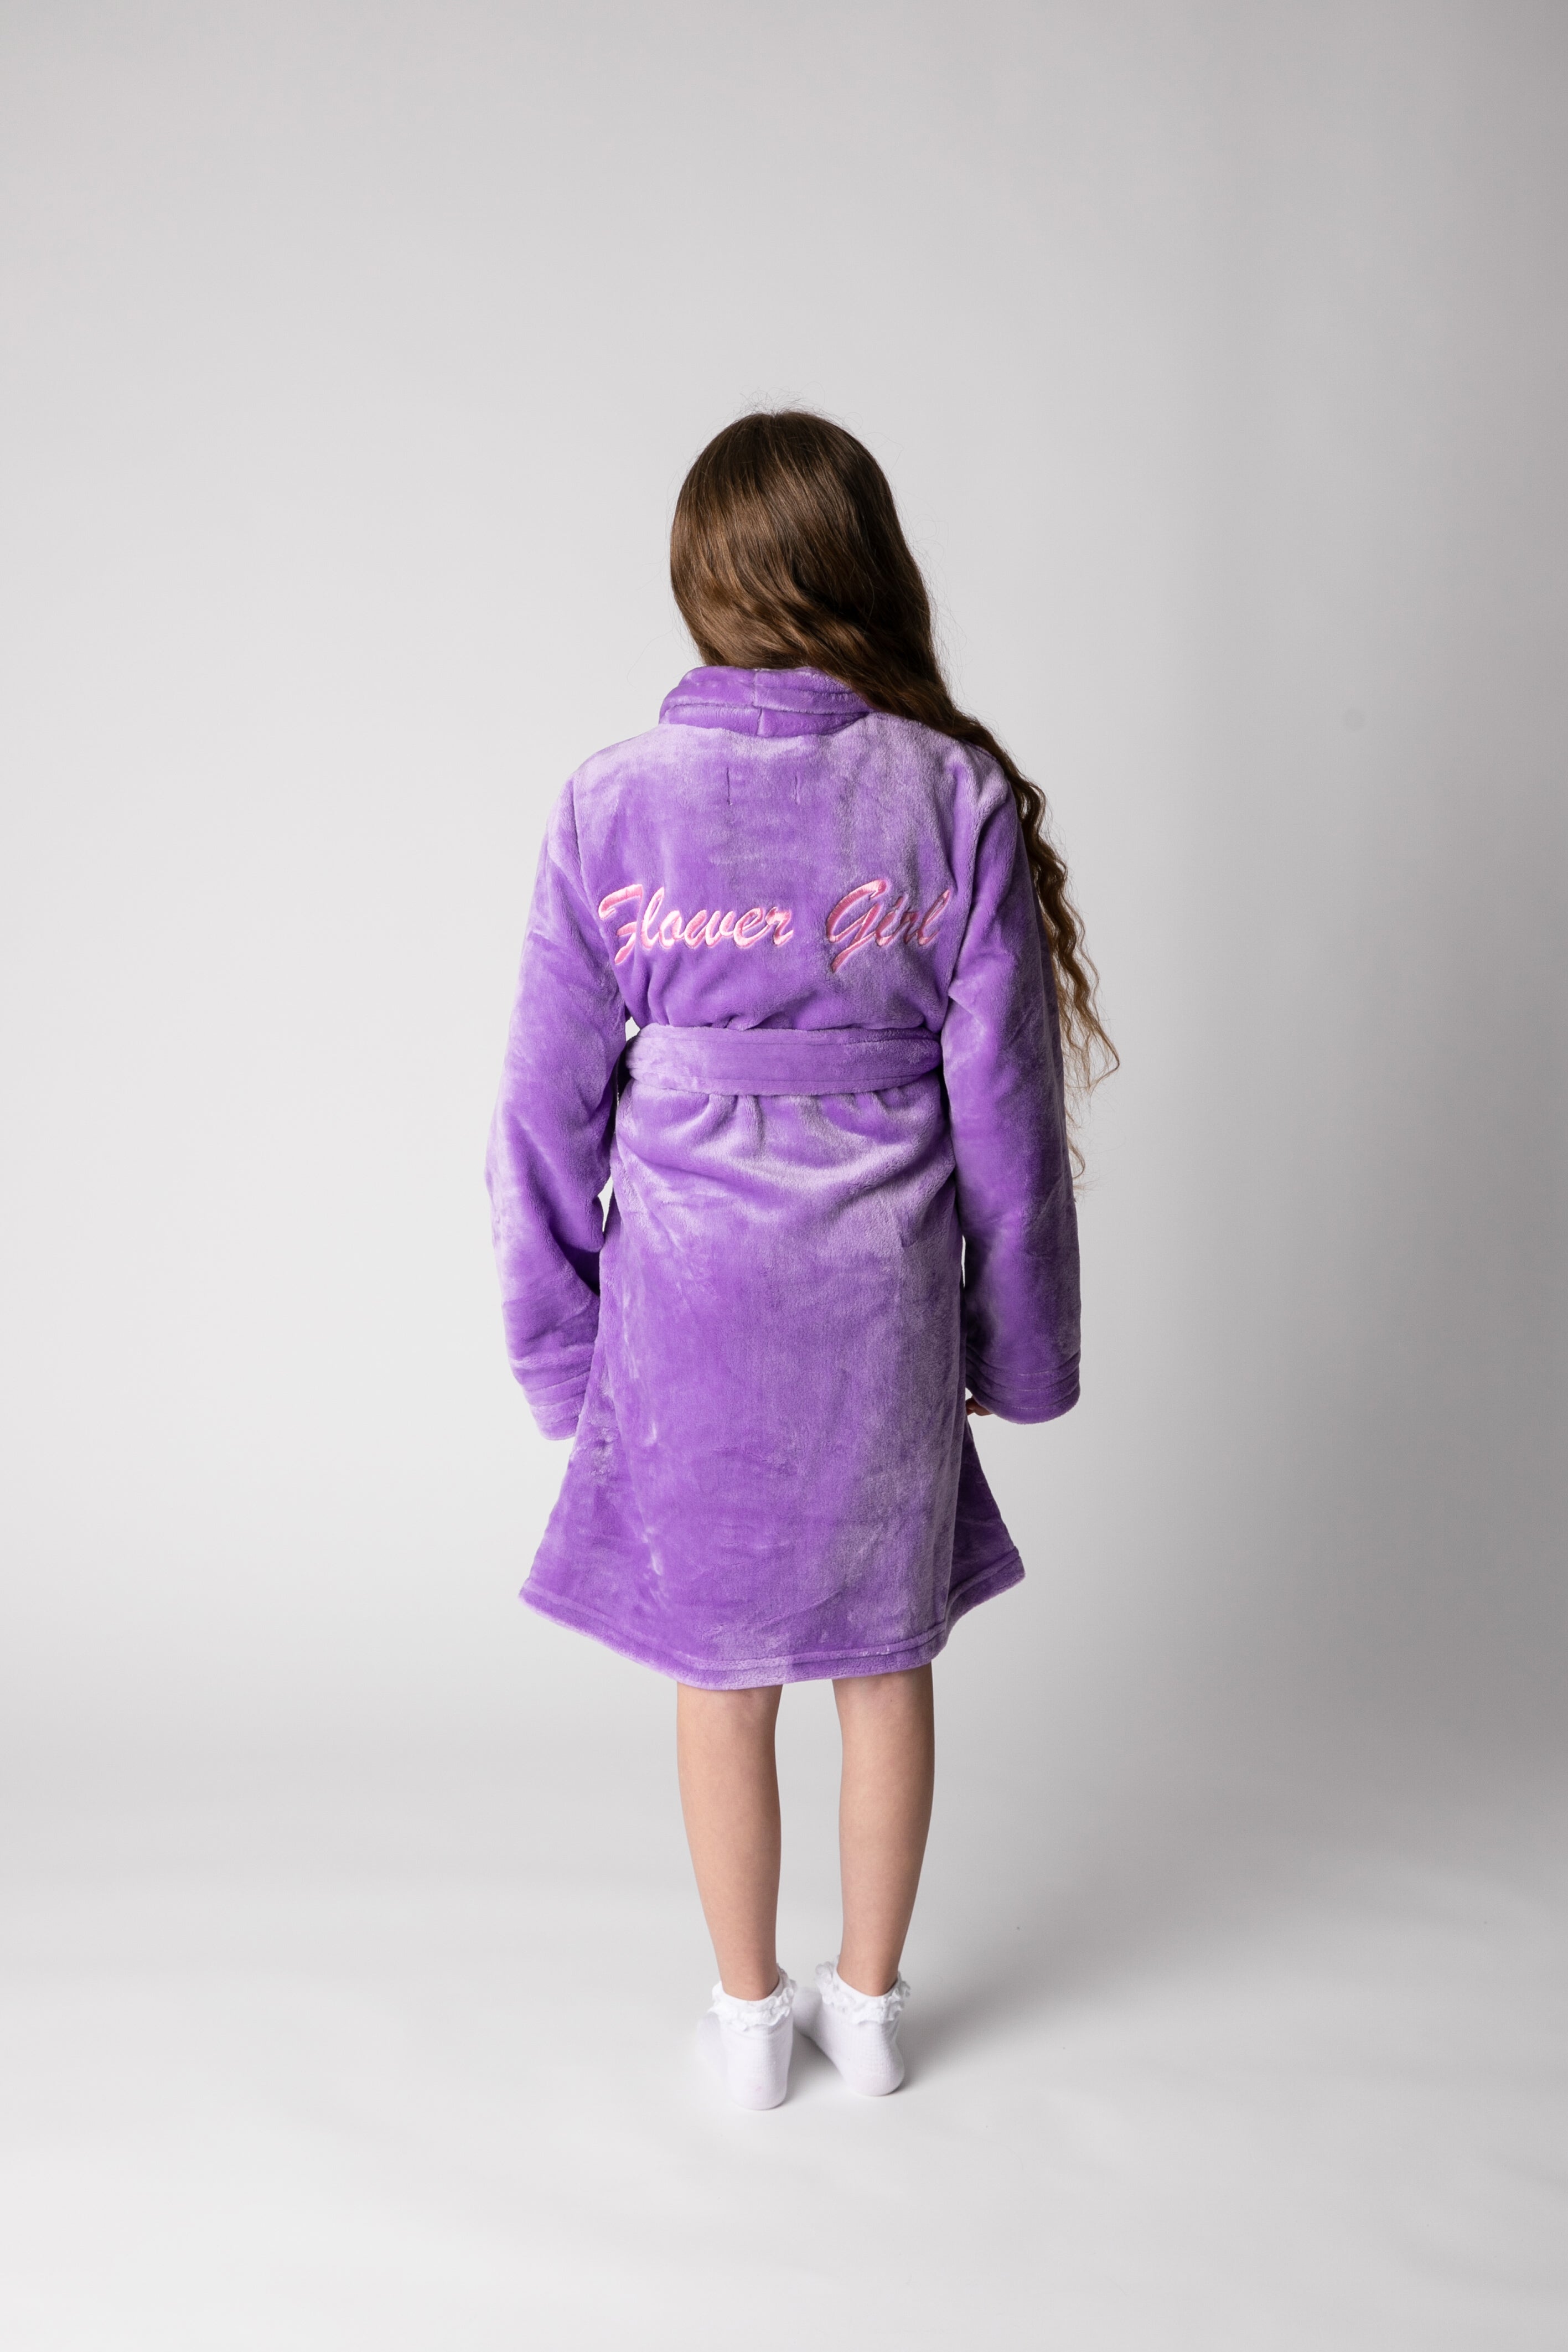 Lilac flower girls robes with baby pink embroidery